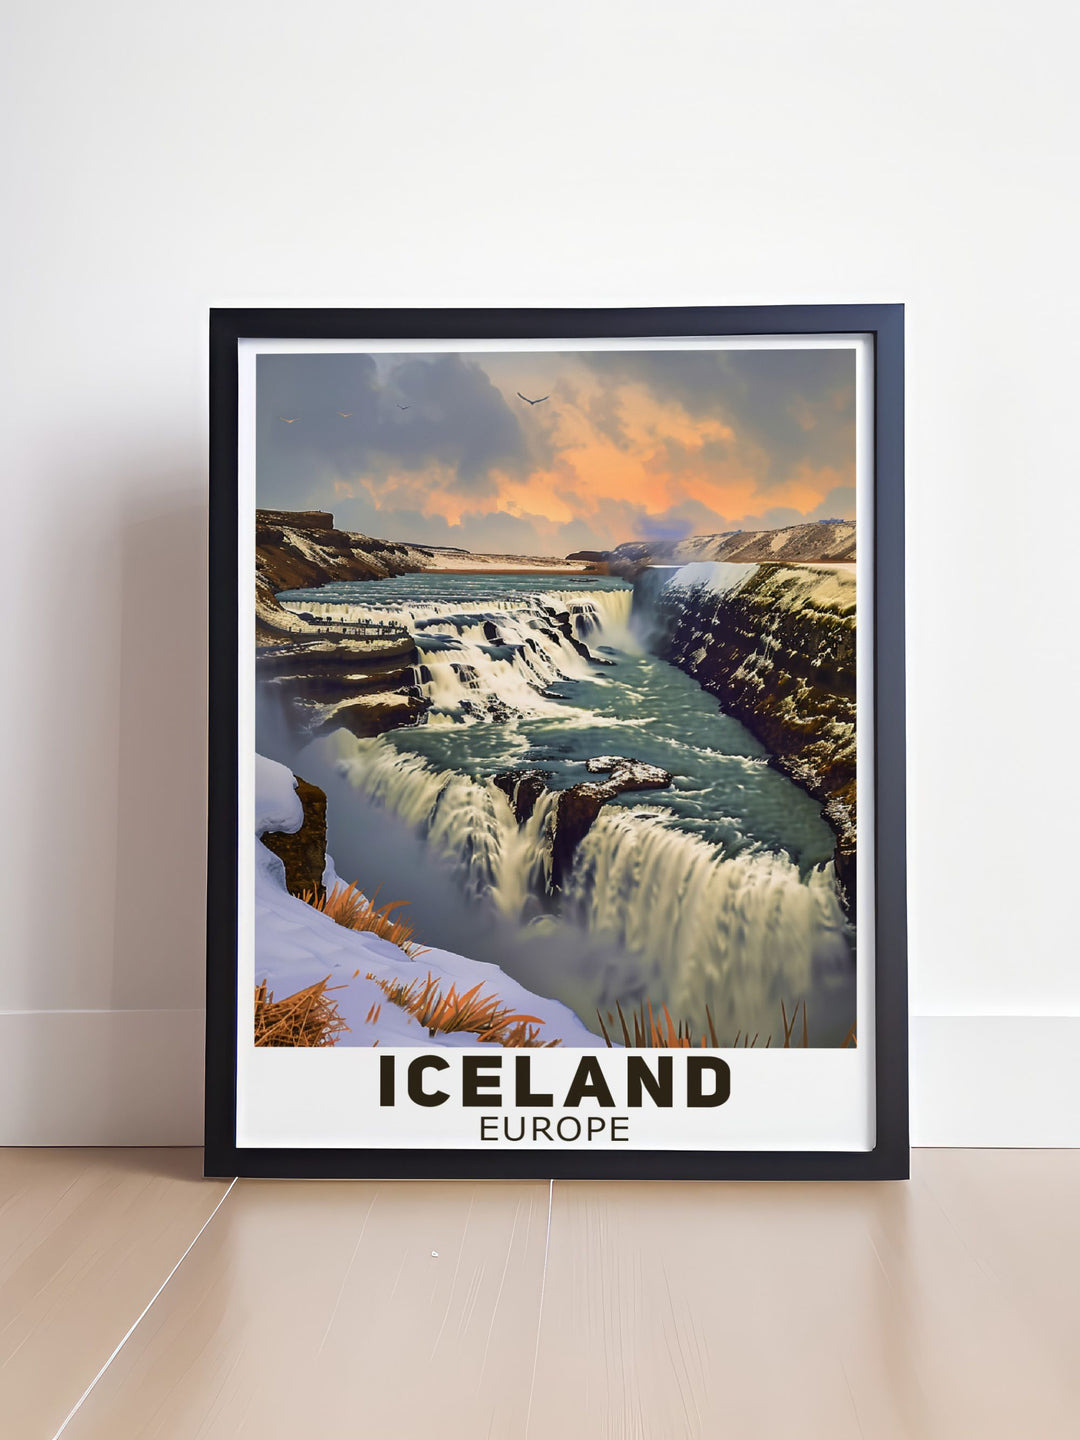 Gallery wall art of Gullfoss waterfall, showcasing the breathtaking view of the cascading waters. This print captures the majesty and power of Icelands natural wonders, making it a striking addition to any collection.